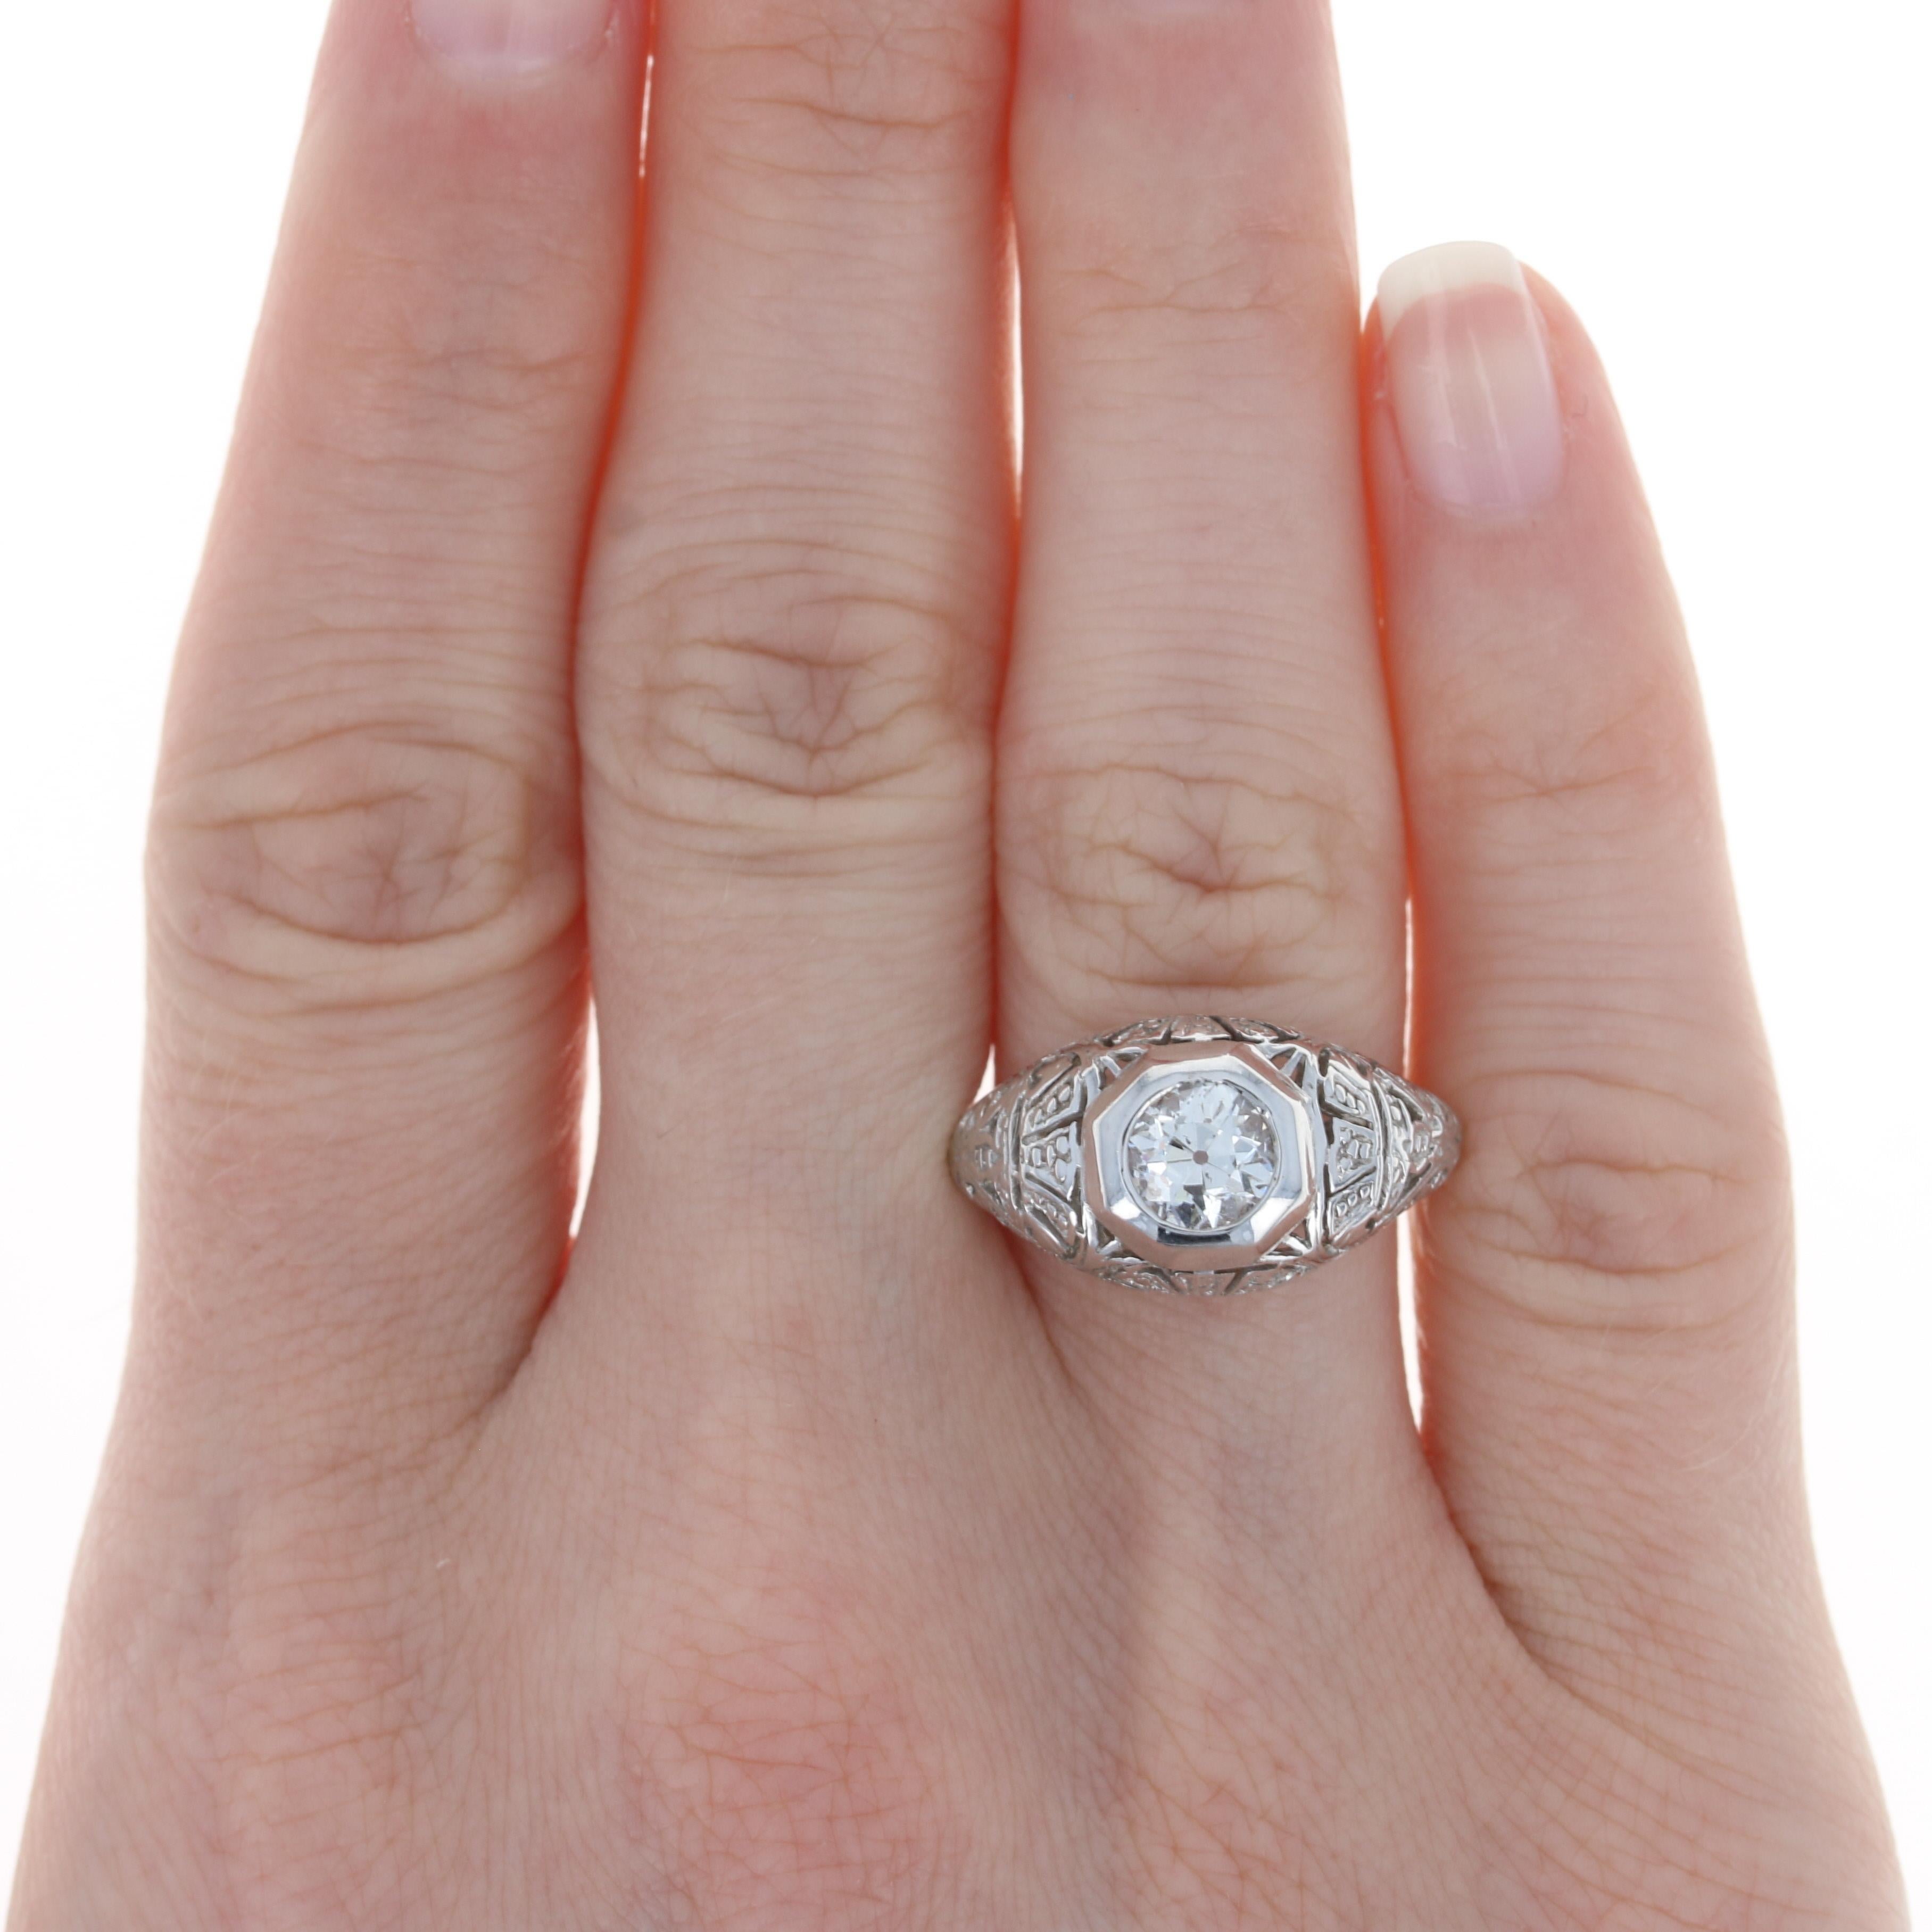 For Sale:  Vintage Diamond Engagement Ring, 18k White Gold Old Mine Cut Solitaire .92ct 2